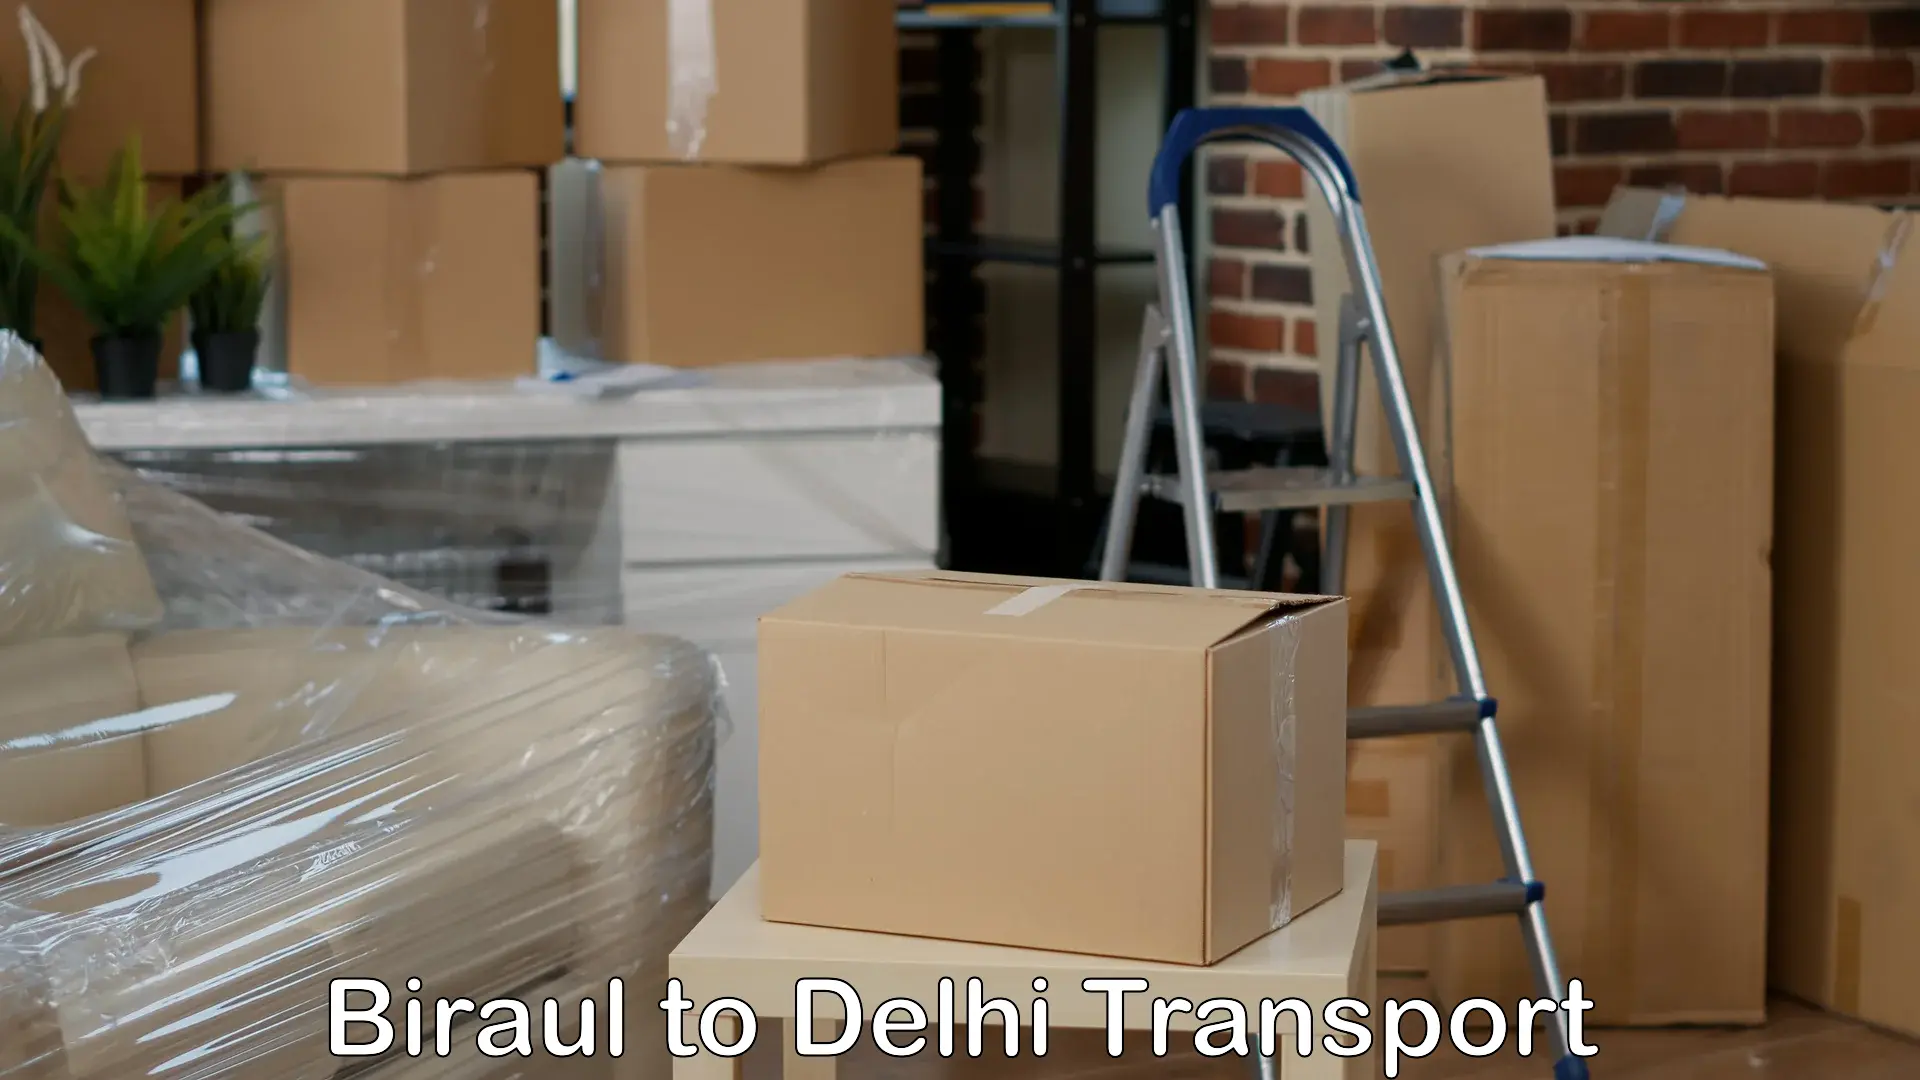 Truck transport companies in India Biraul to Lodhi Road